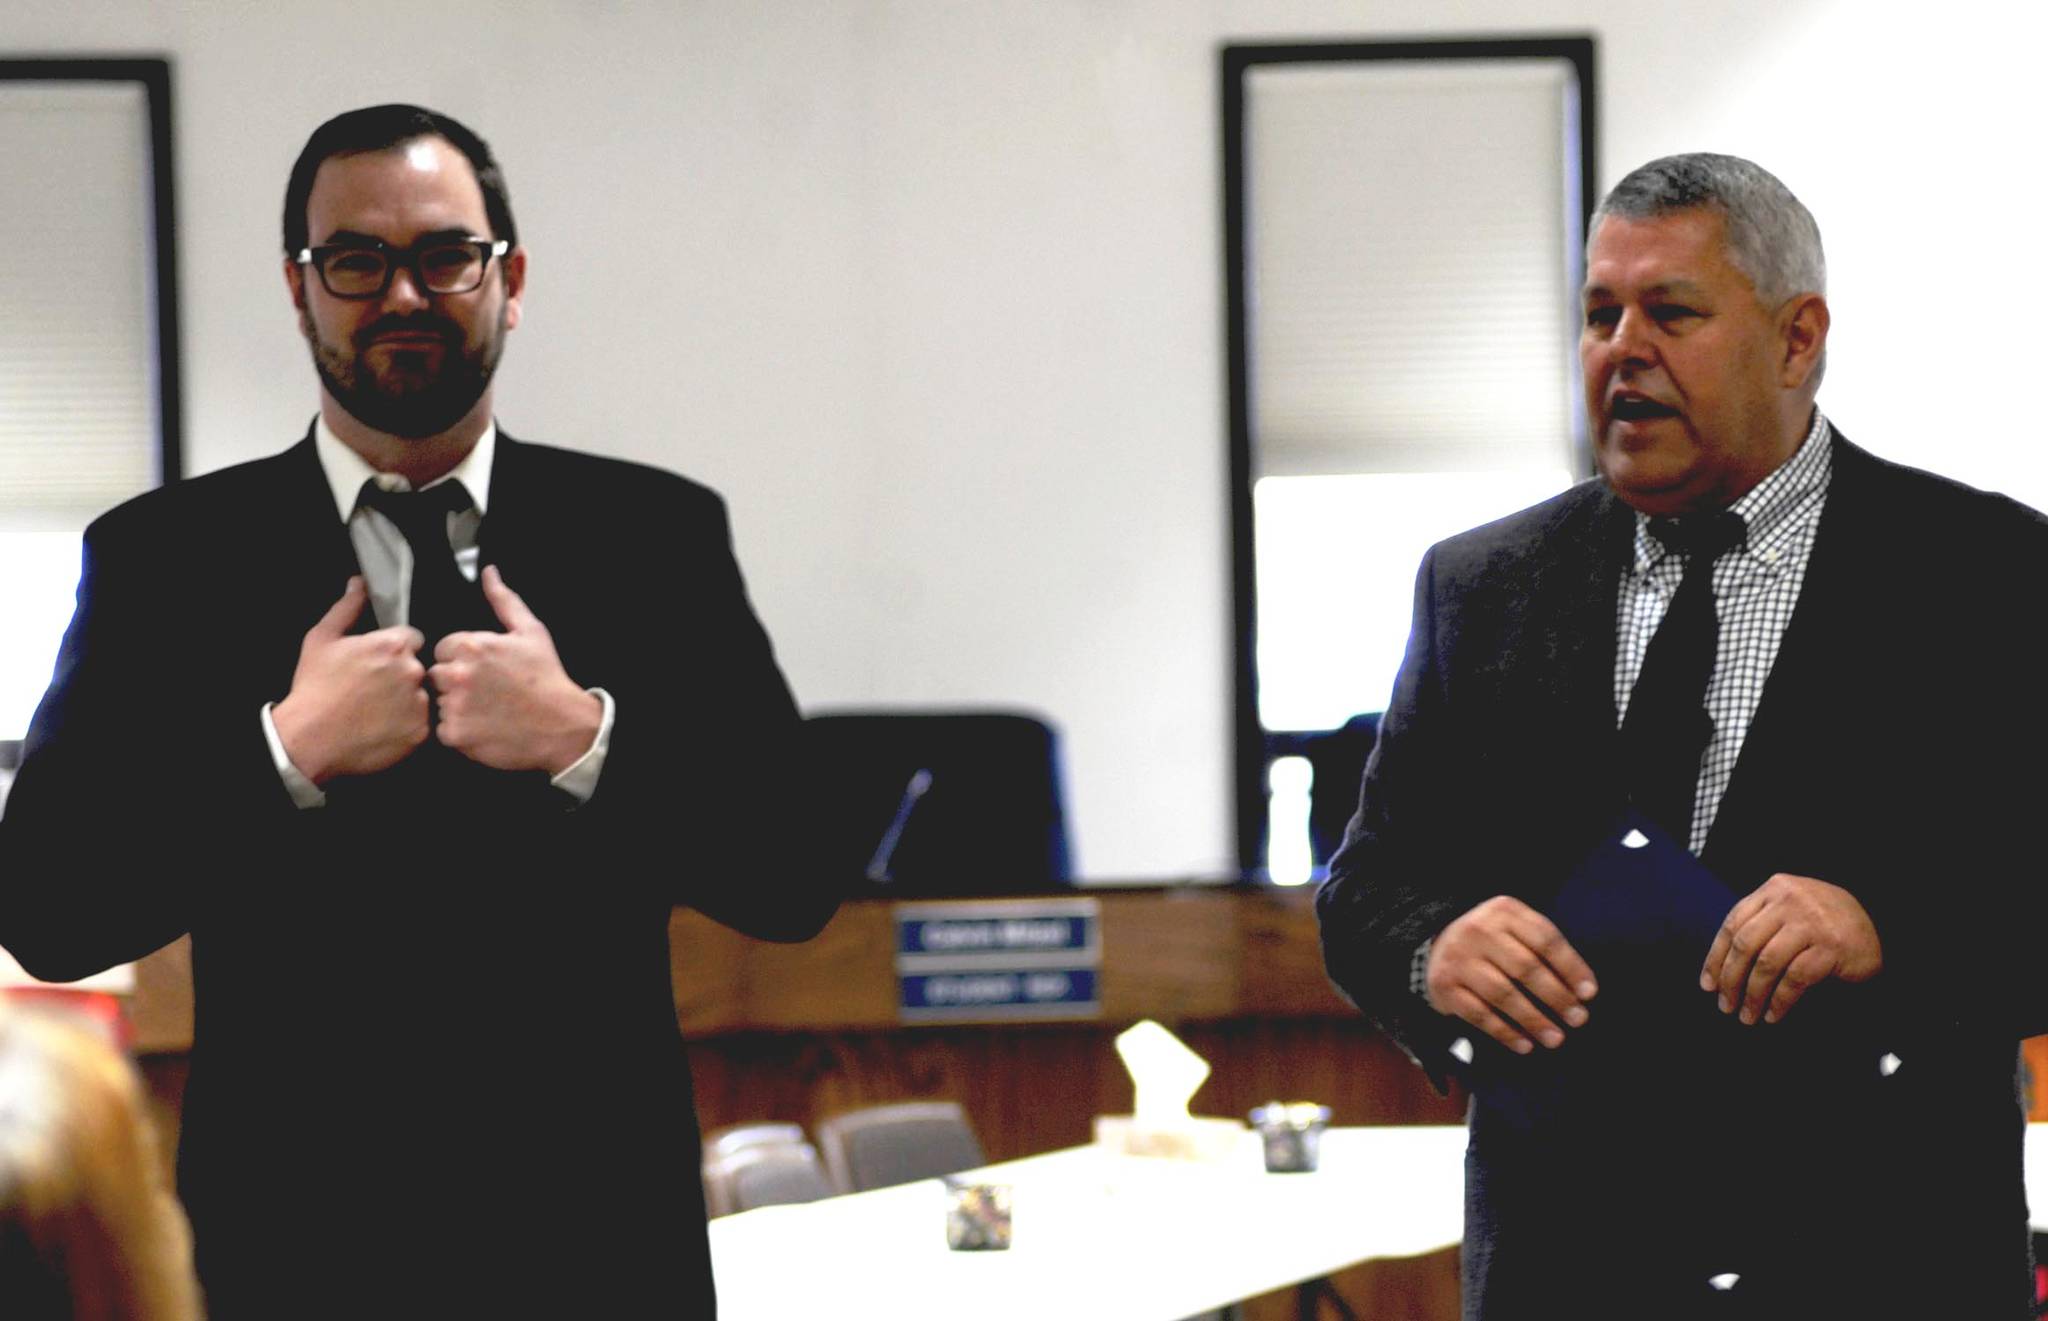 Borough Mayor Charlie Pierce and Chief of Staff John Quick speak to the attendees at Pierce’s swearing-in ceremony at the George A. Navarre Borough Administration Building on Monday, Nov. 6, 2017 in Soldotna, Alaska. (Photo by Elizabeth Earl/Peninsula Clarion, file)